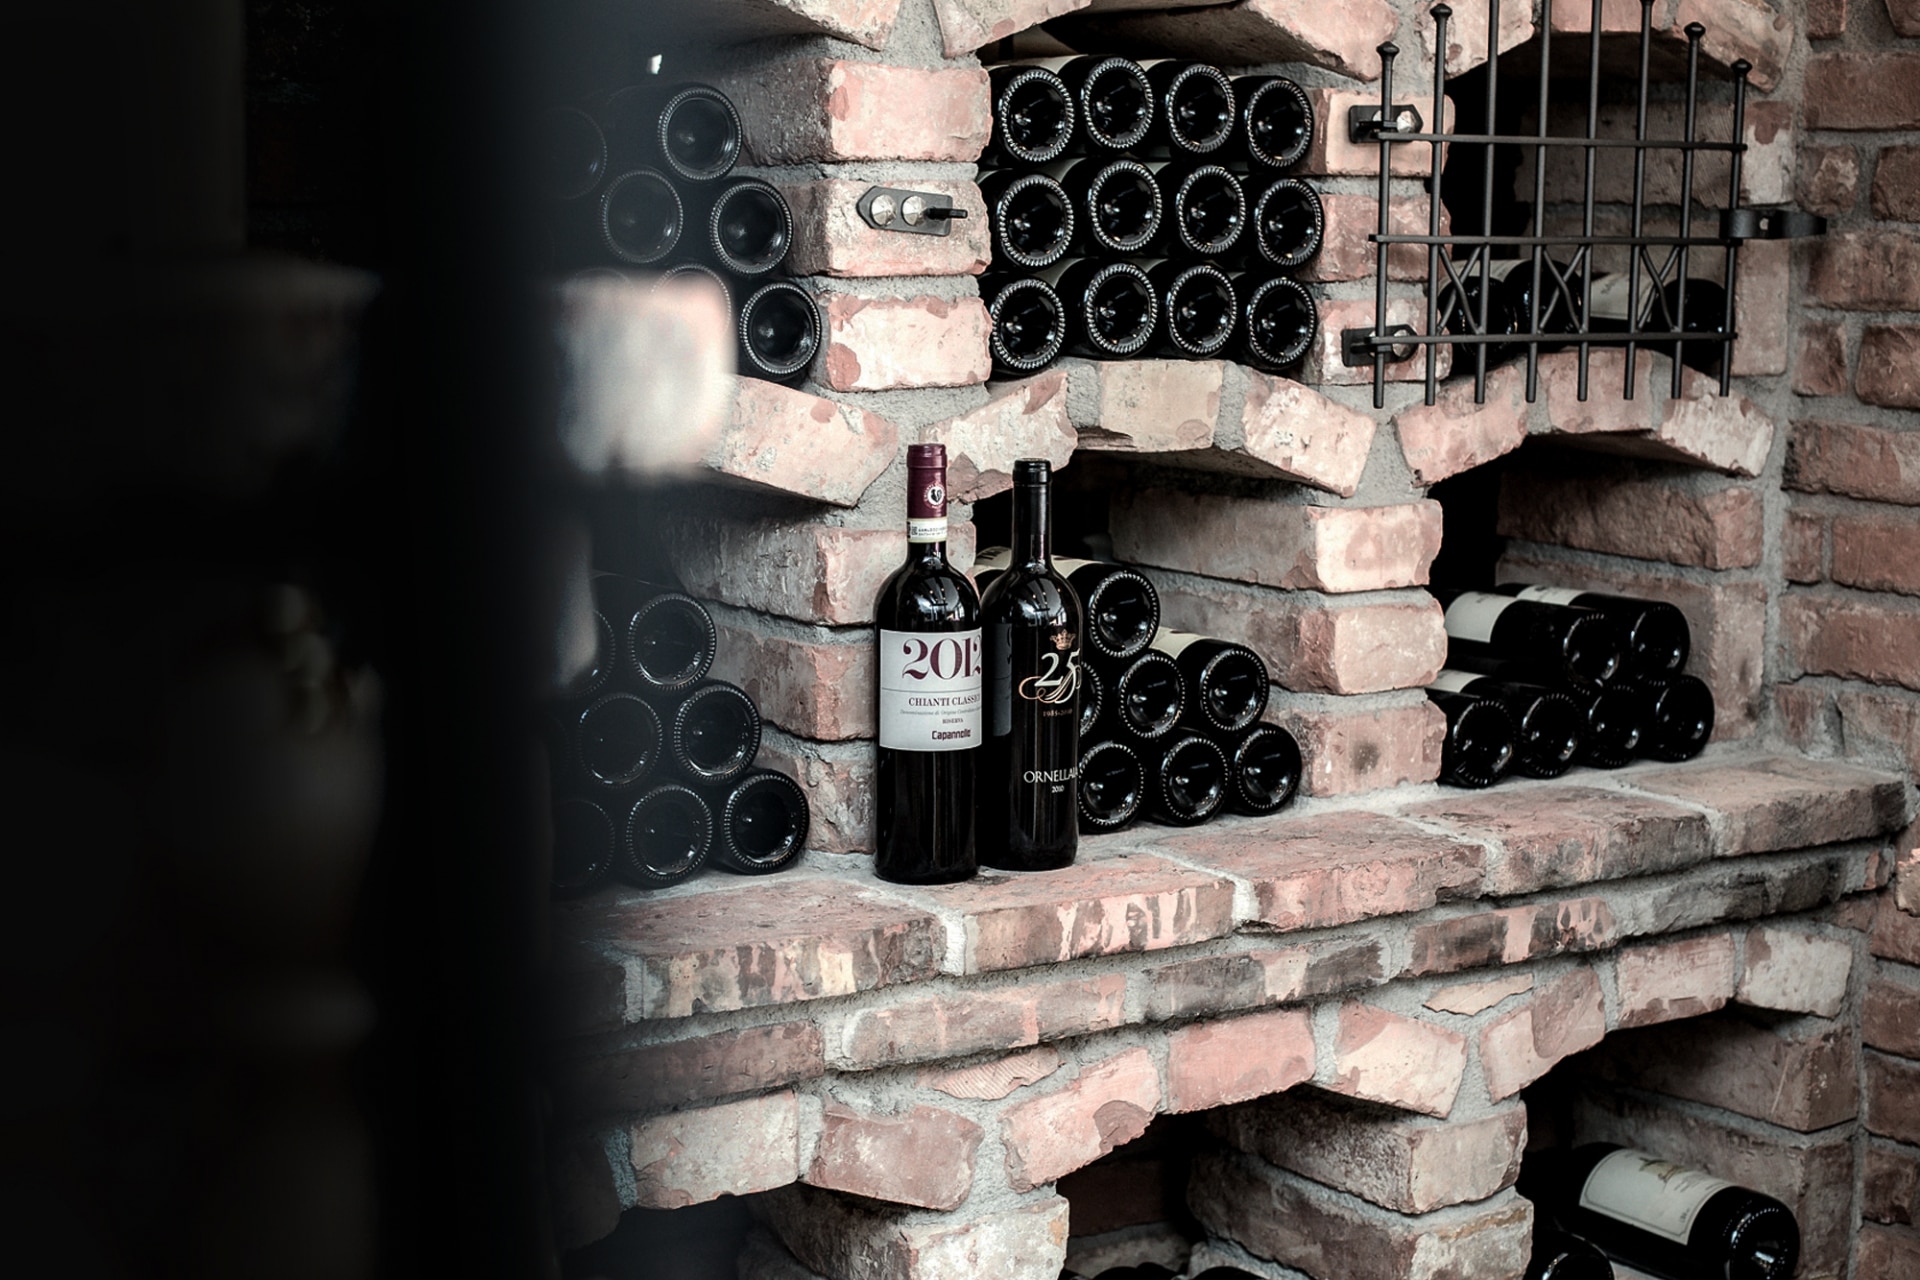 A rustic brick wine cellar with bottles neatly organized in built-in racks and a few select bottles showcased at the forefront.